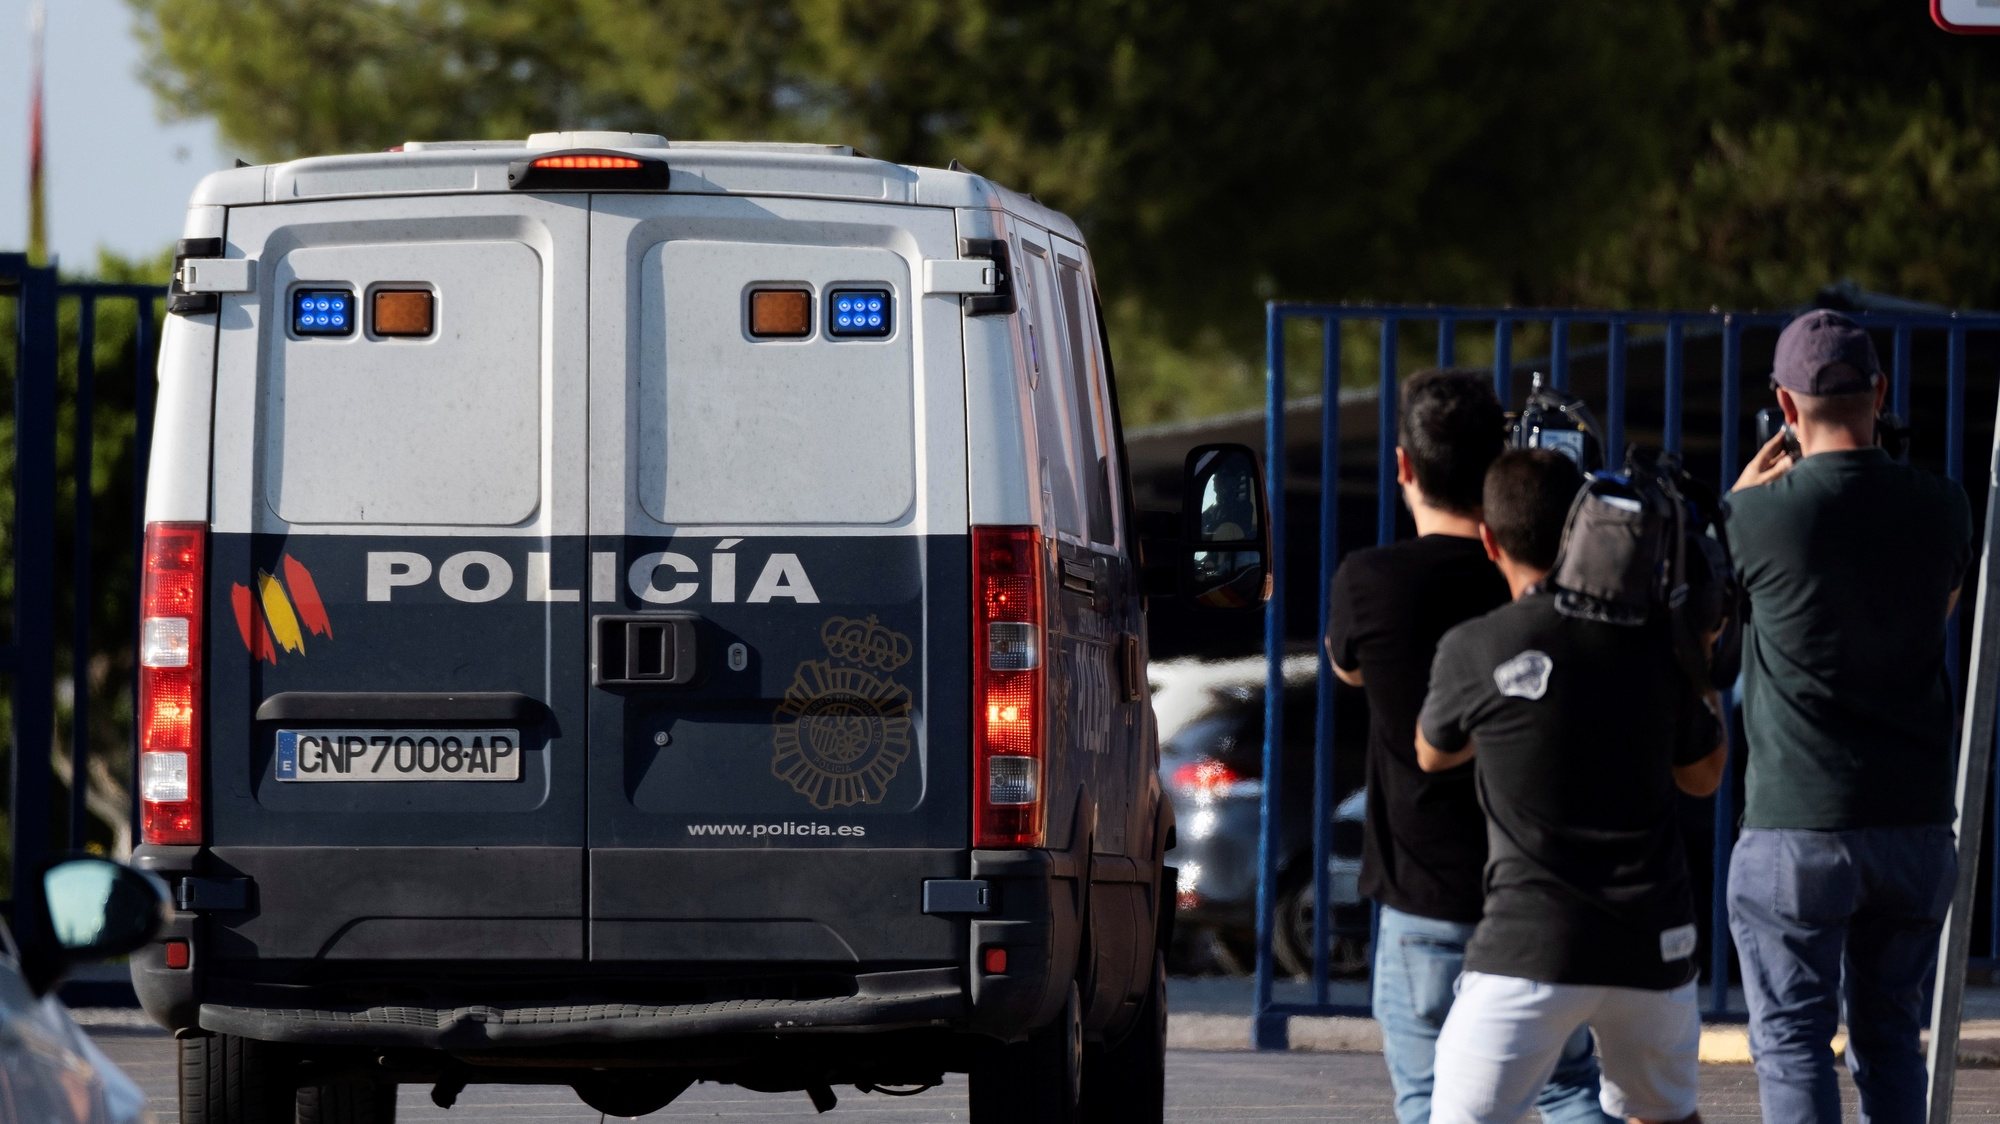 epa07664499 A Spanish National Police van transporting the five men accused of gang raping a woman back in 2016 during the San Fermines Fiesta, leaves a police station after their appearance in accordance to the legal requirements for their release on bail, in Sevilla, Spain, 21 June 2019. Spanish Police has arrested four of the five men popularly known as &#039;La Manada&#039; (wolfpack) in accordance to the arrest warrant ordered by Navarra Provincial Court after Spanish Supreme Court rose from 9 to 15 years the sentence against them for raping a young woman during San Fermines fiestas back in 2016. The Supreme Court considered that all the five accused committed a sexual assault invalidating the previous sentence by Navarra High Court of Justice that read that the aggression was only a sexual abuse.  EPA/PEPO HERRERA